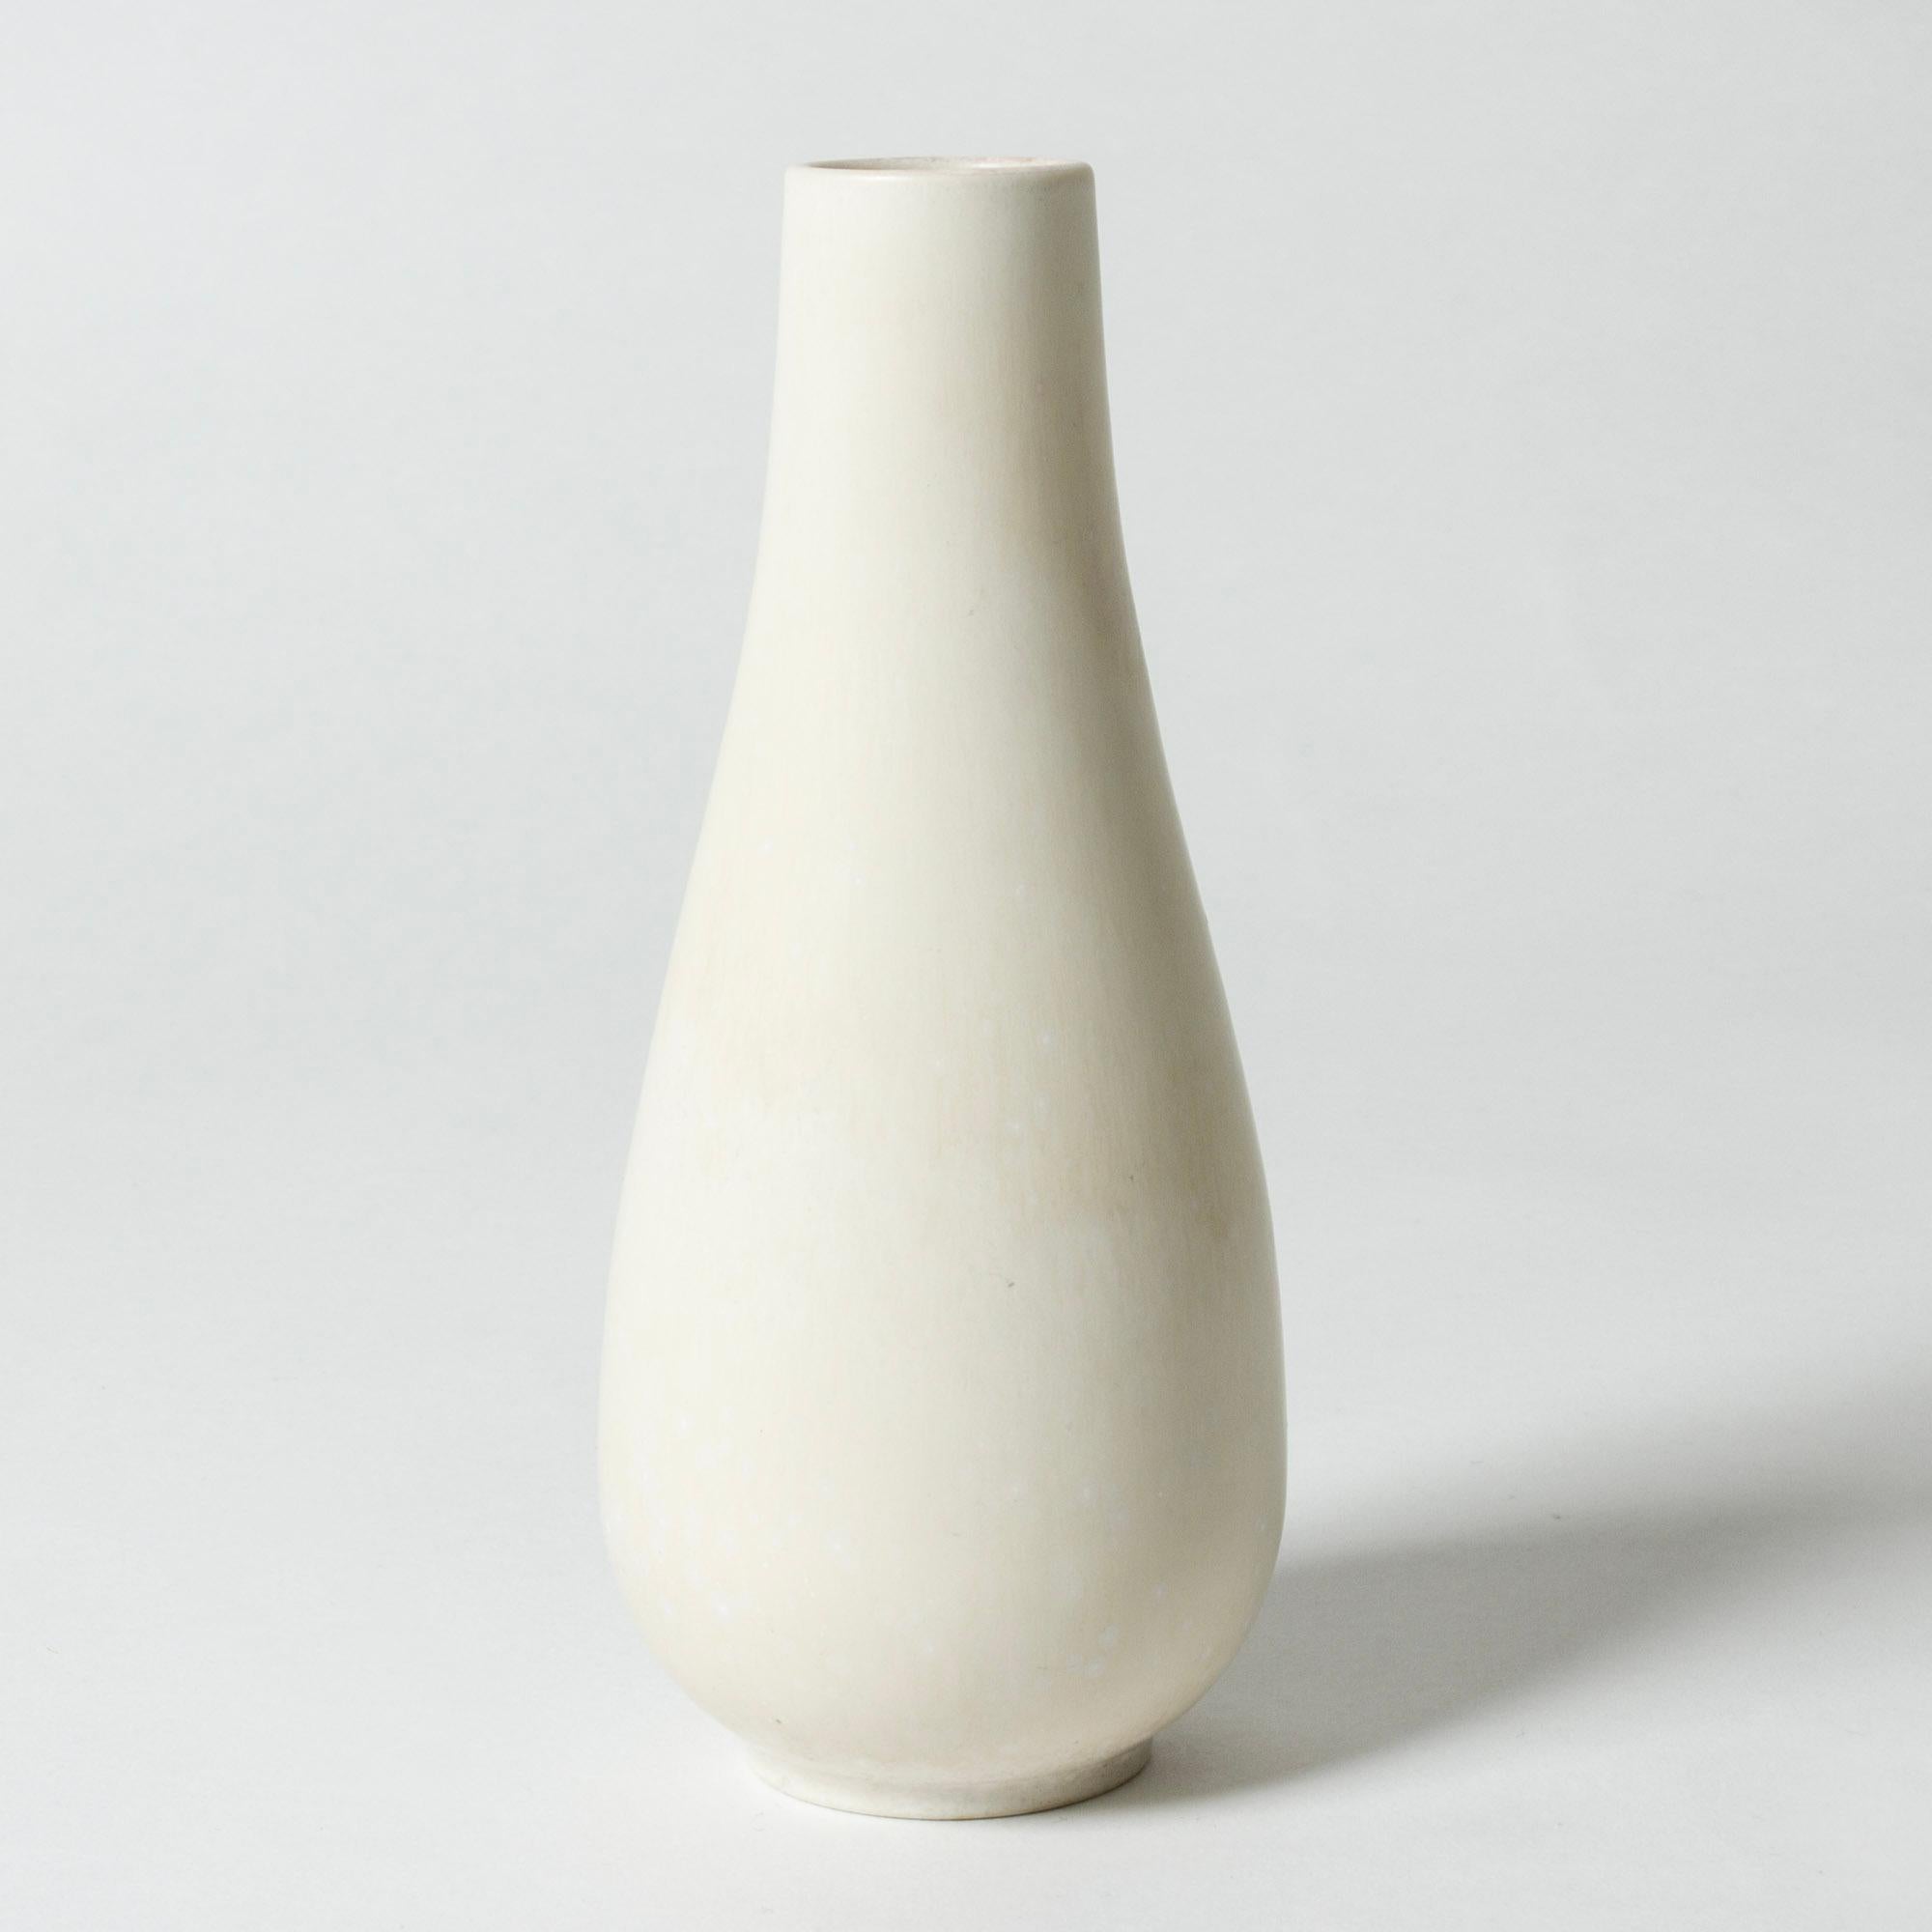 Lovely stoneware vase by Gunnar Nylund, in a smooth modernist form. Glazed eggshell white.

Gunnar Nylund was one of the most influential ceramicists and designers of the Swedish mid-century period. He was Rörstrand’s creative leader from 1931